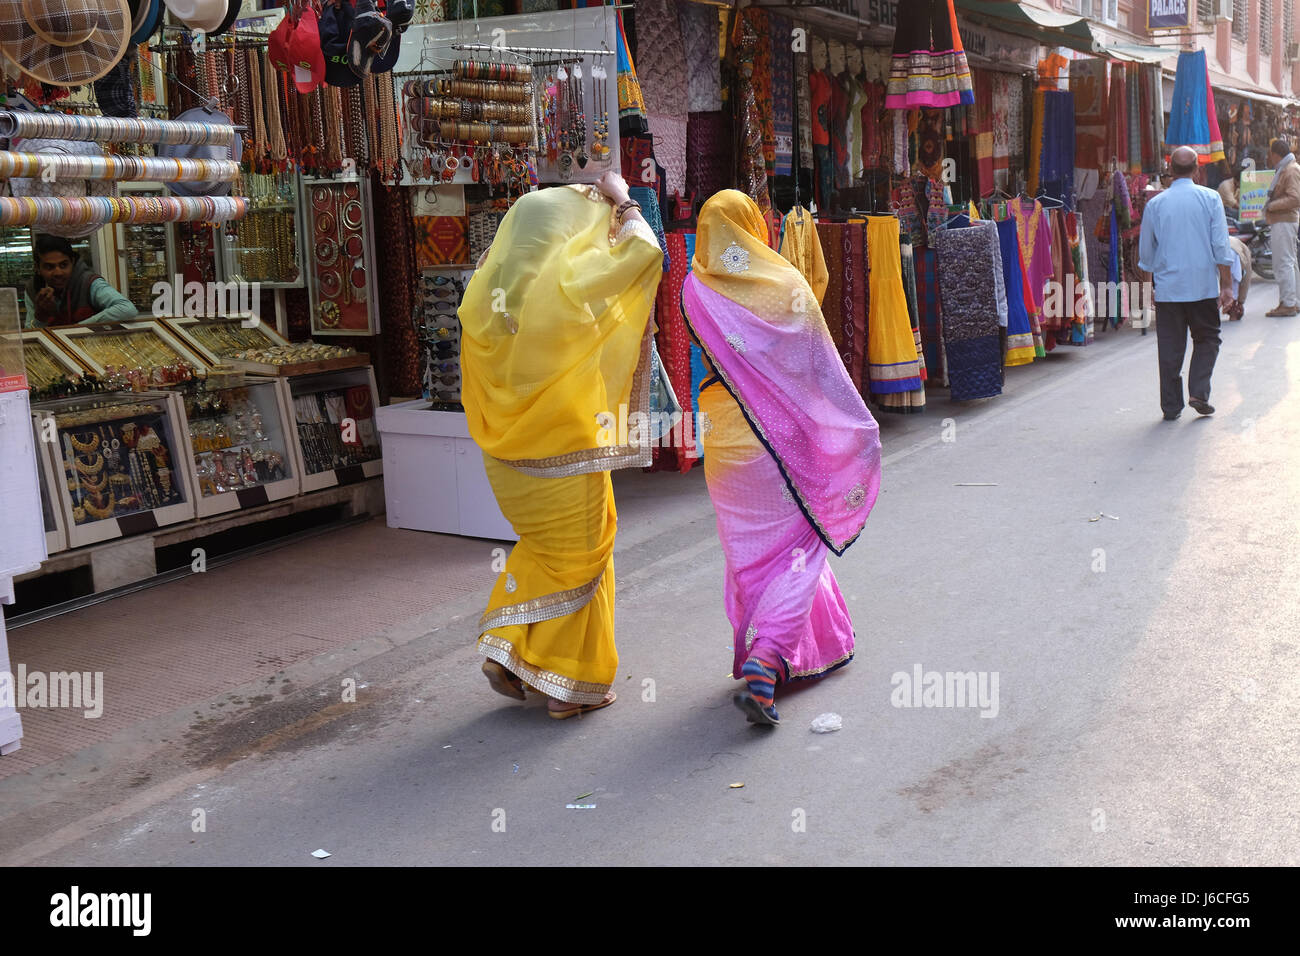 Indian women with traditional colored sari on the street of Pushkar, Rajasthan, India Stock Photo